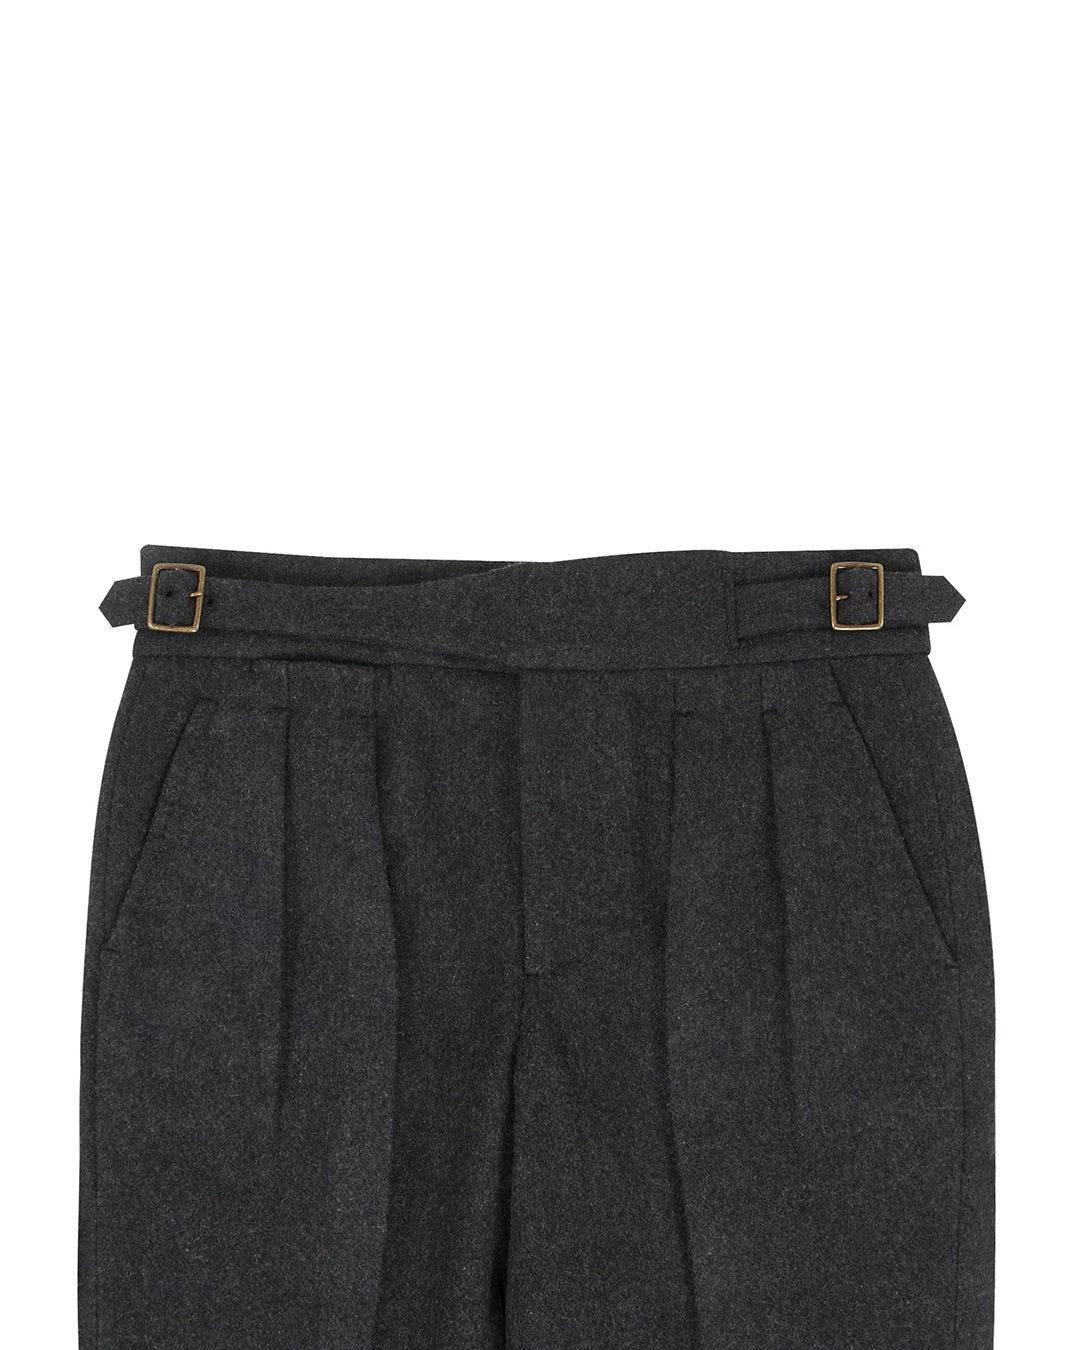 Front view of the Gurkha Pant in Charcoal Grey Wool